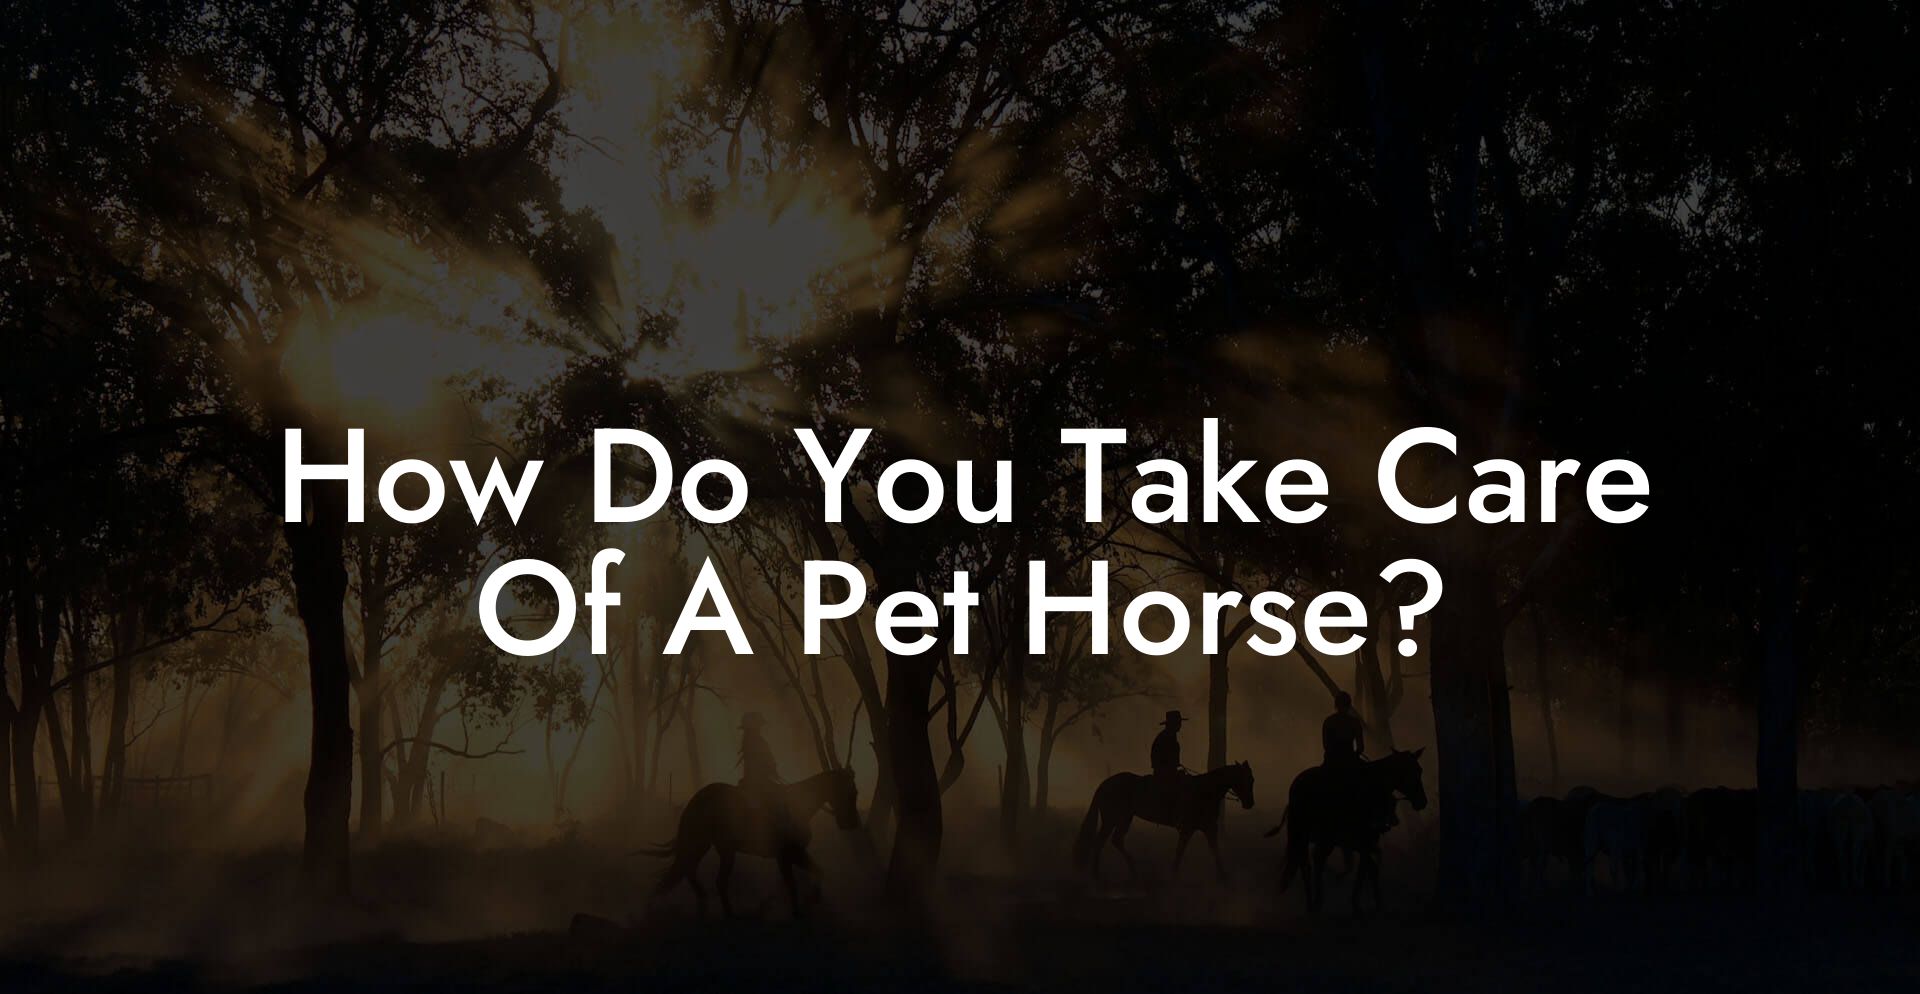 How Do You Take Care Of A Pet Horse?